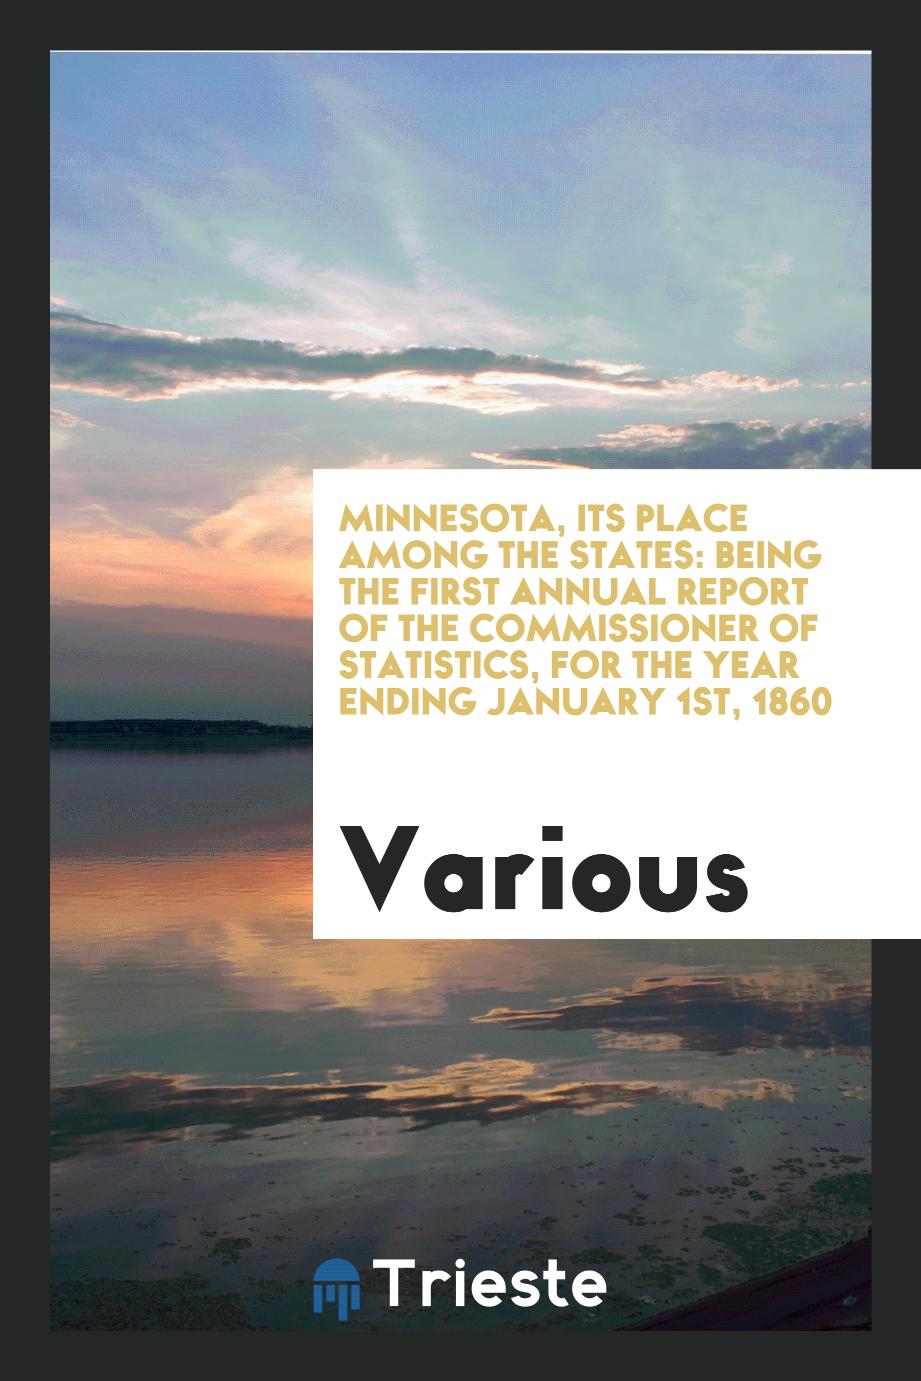 Minnesota, Its Place among the States: Being the First Annual Report of the Commissioner of Statistics, for the Year Ending January 1st, 1860